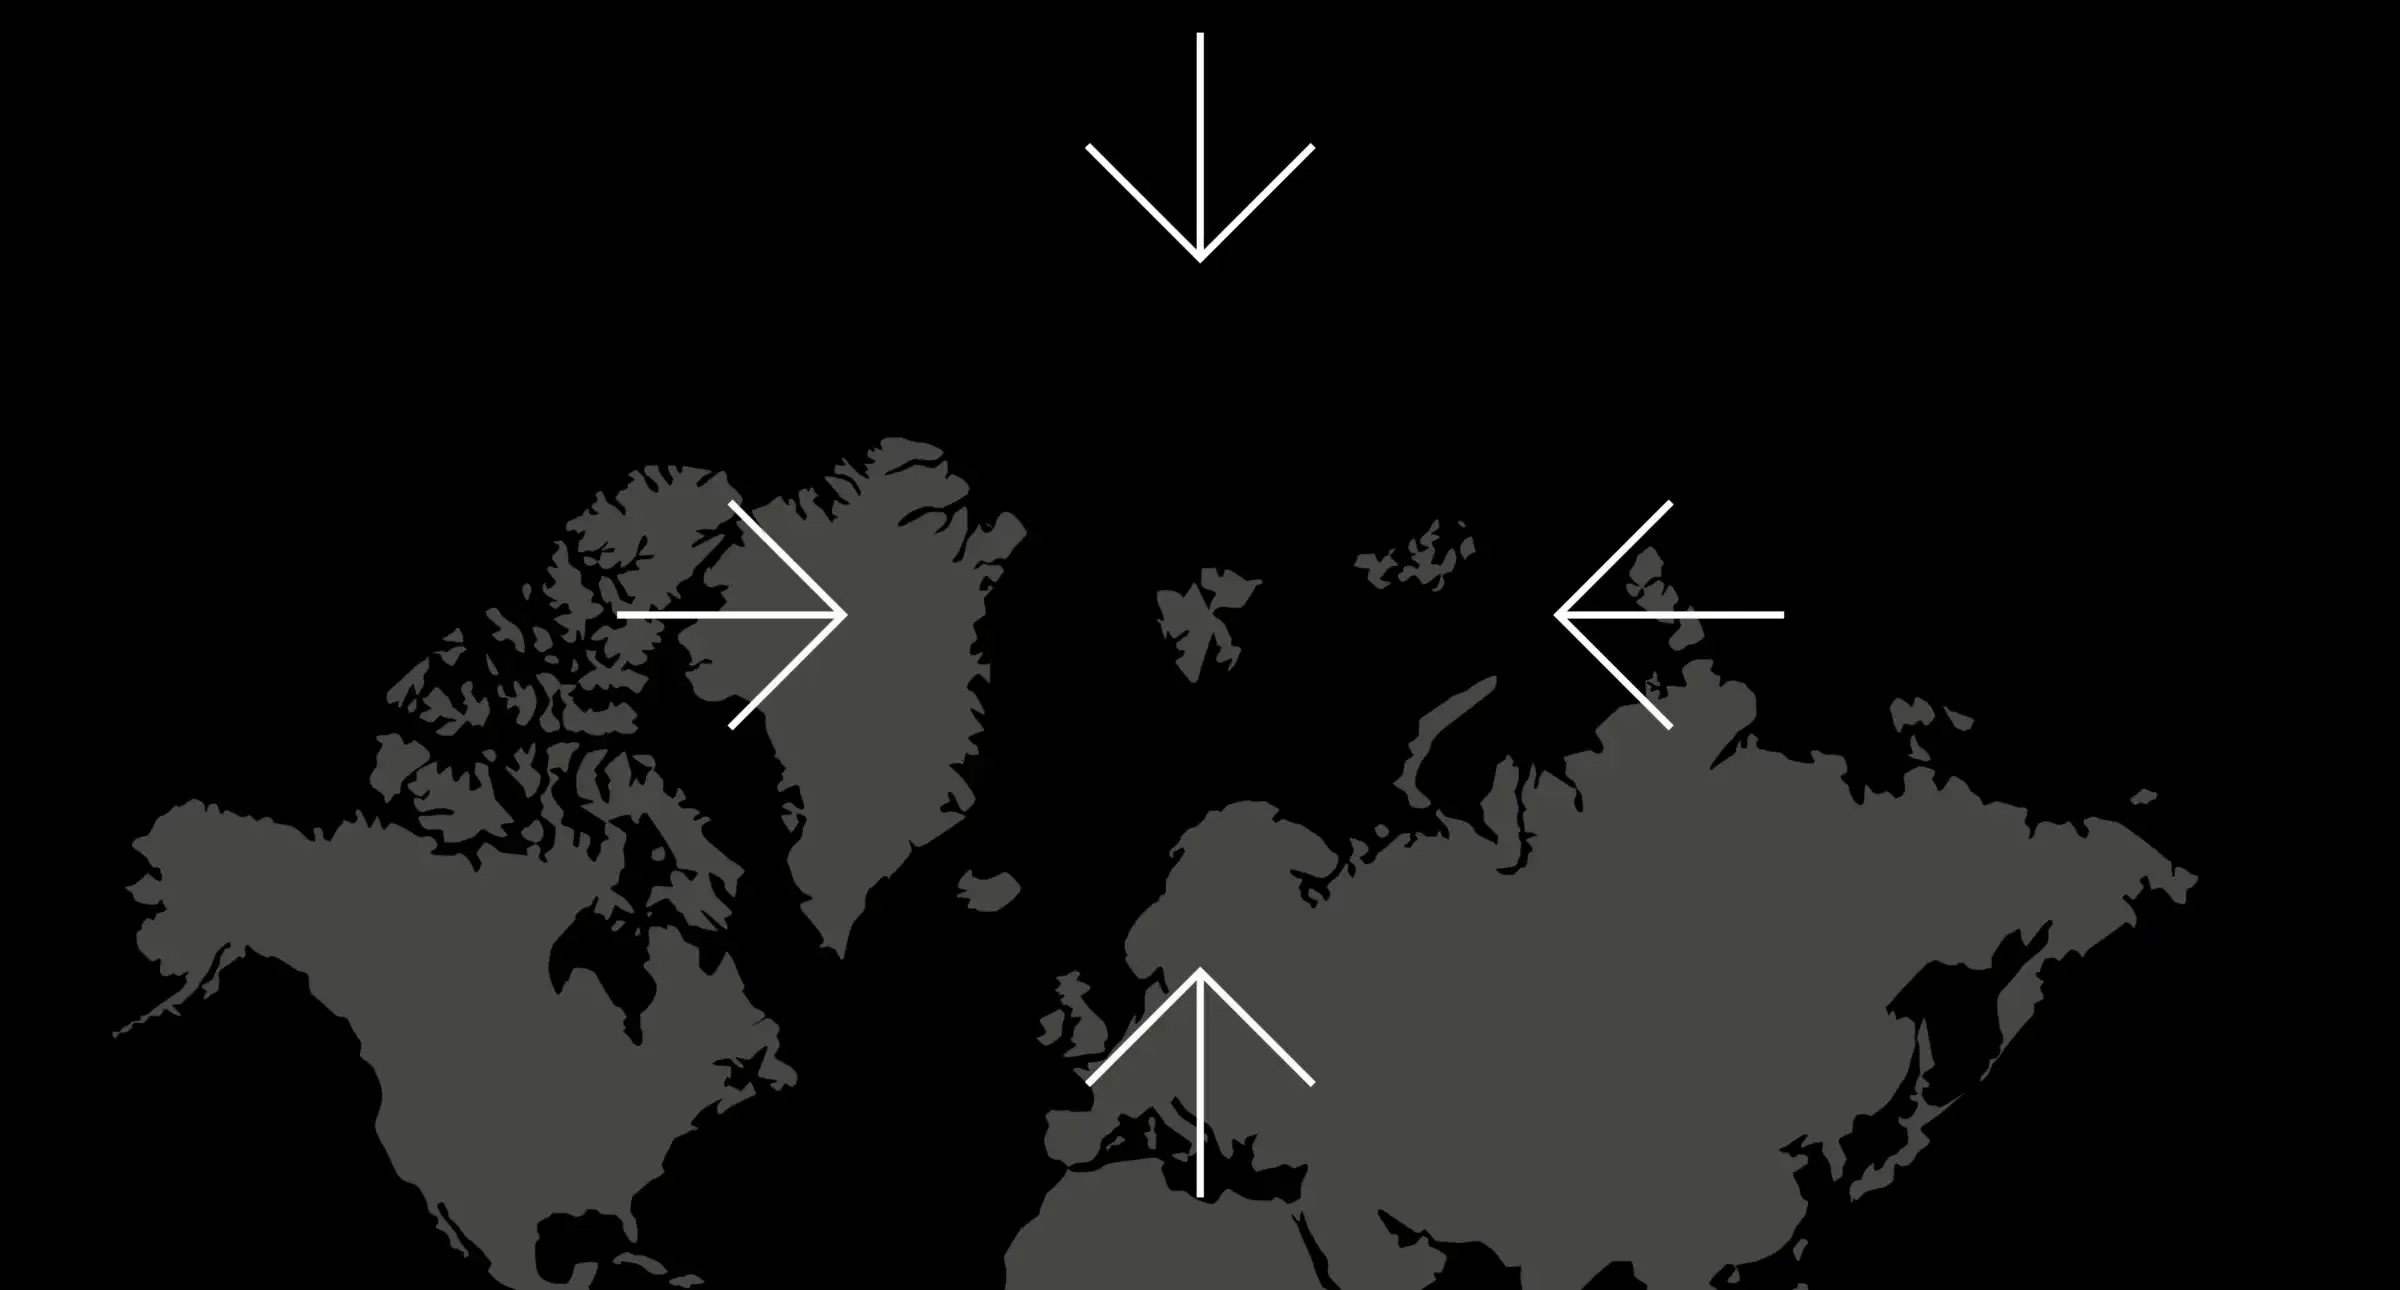 Black and grey map with 4 arrows pointing to Svalbard.